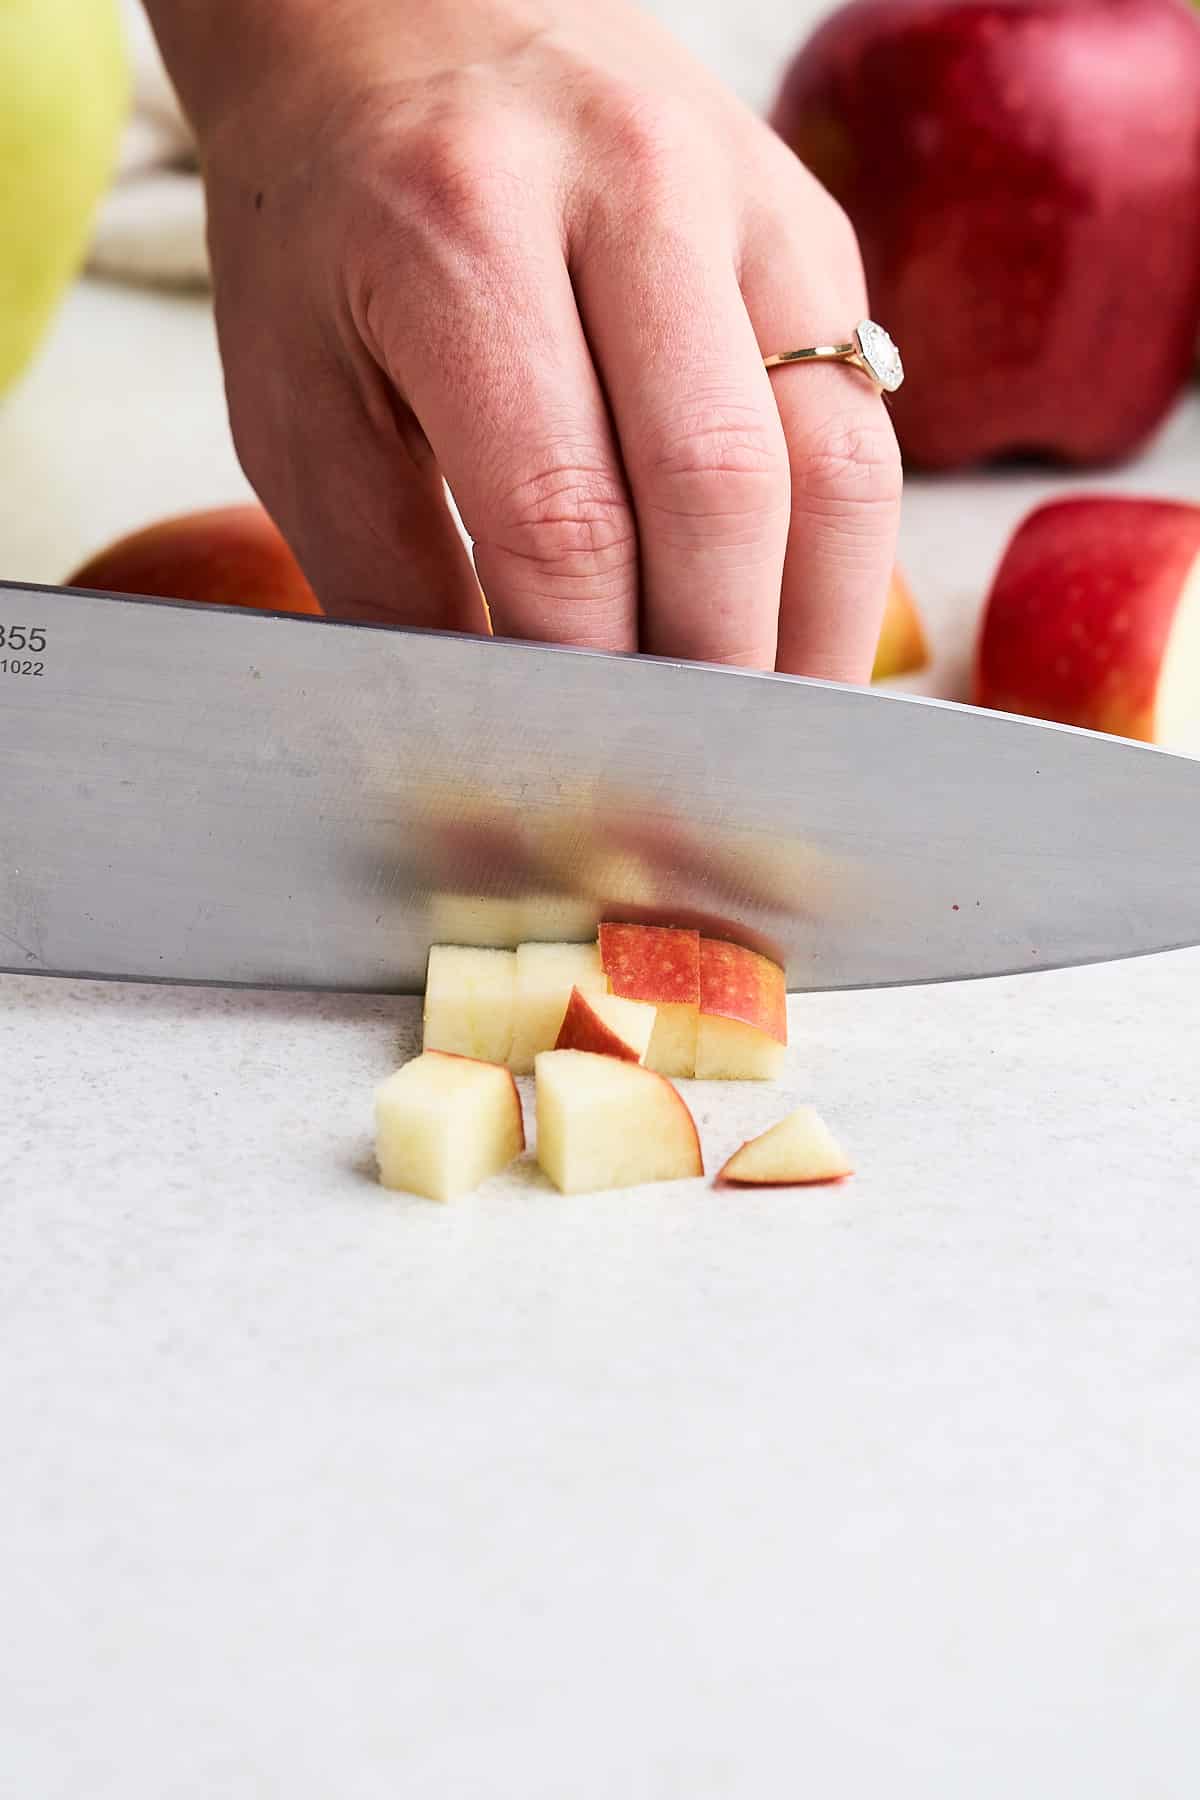 Cutting an apple into cubes.